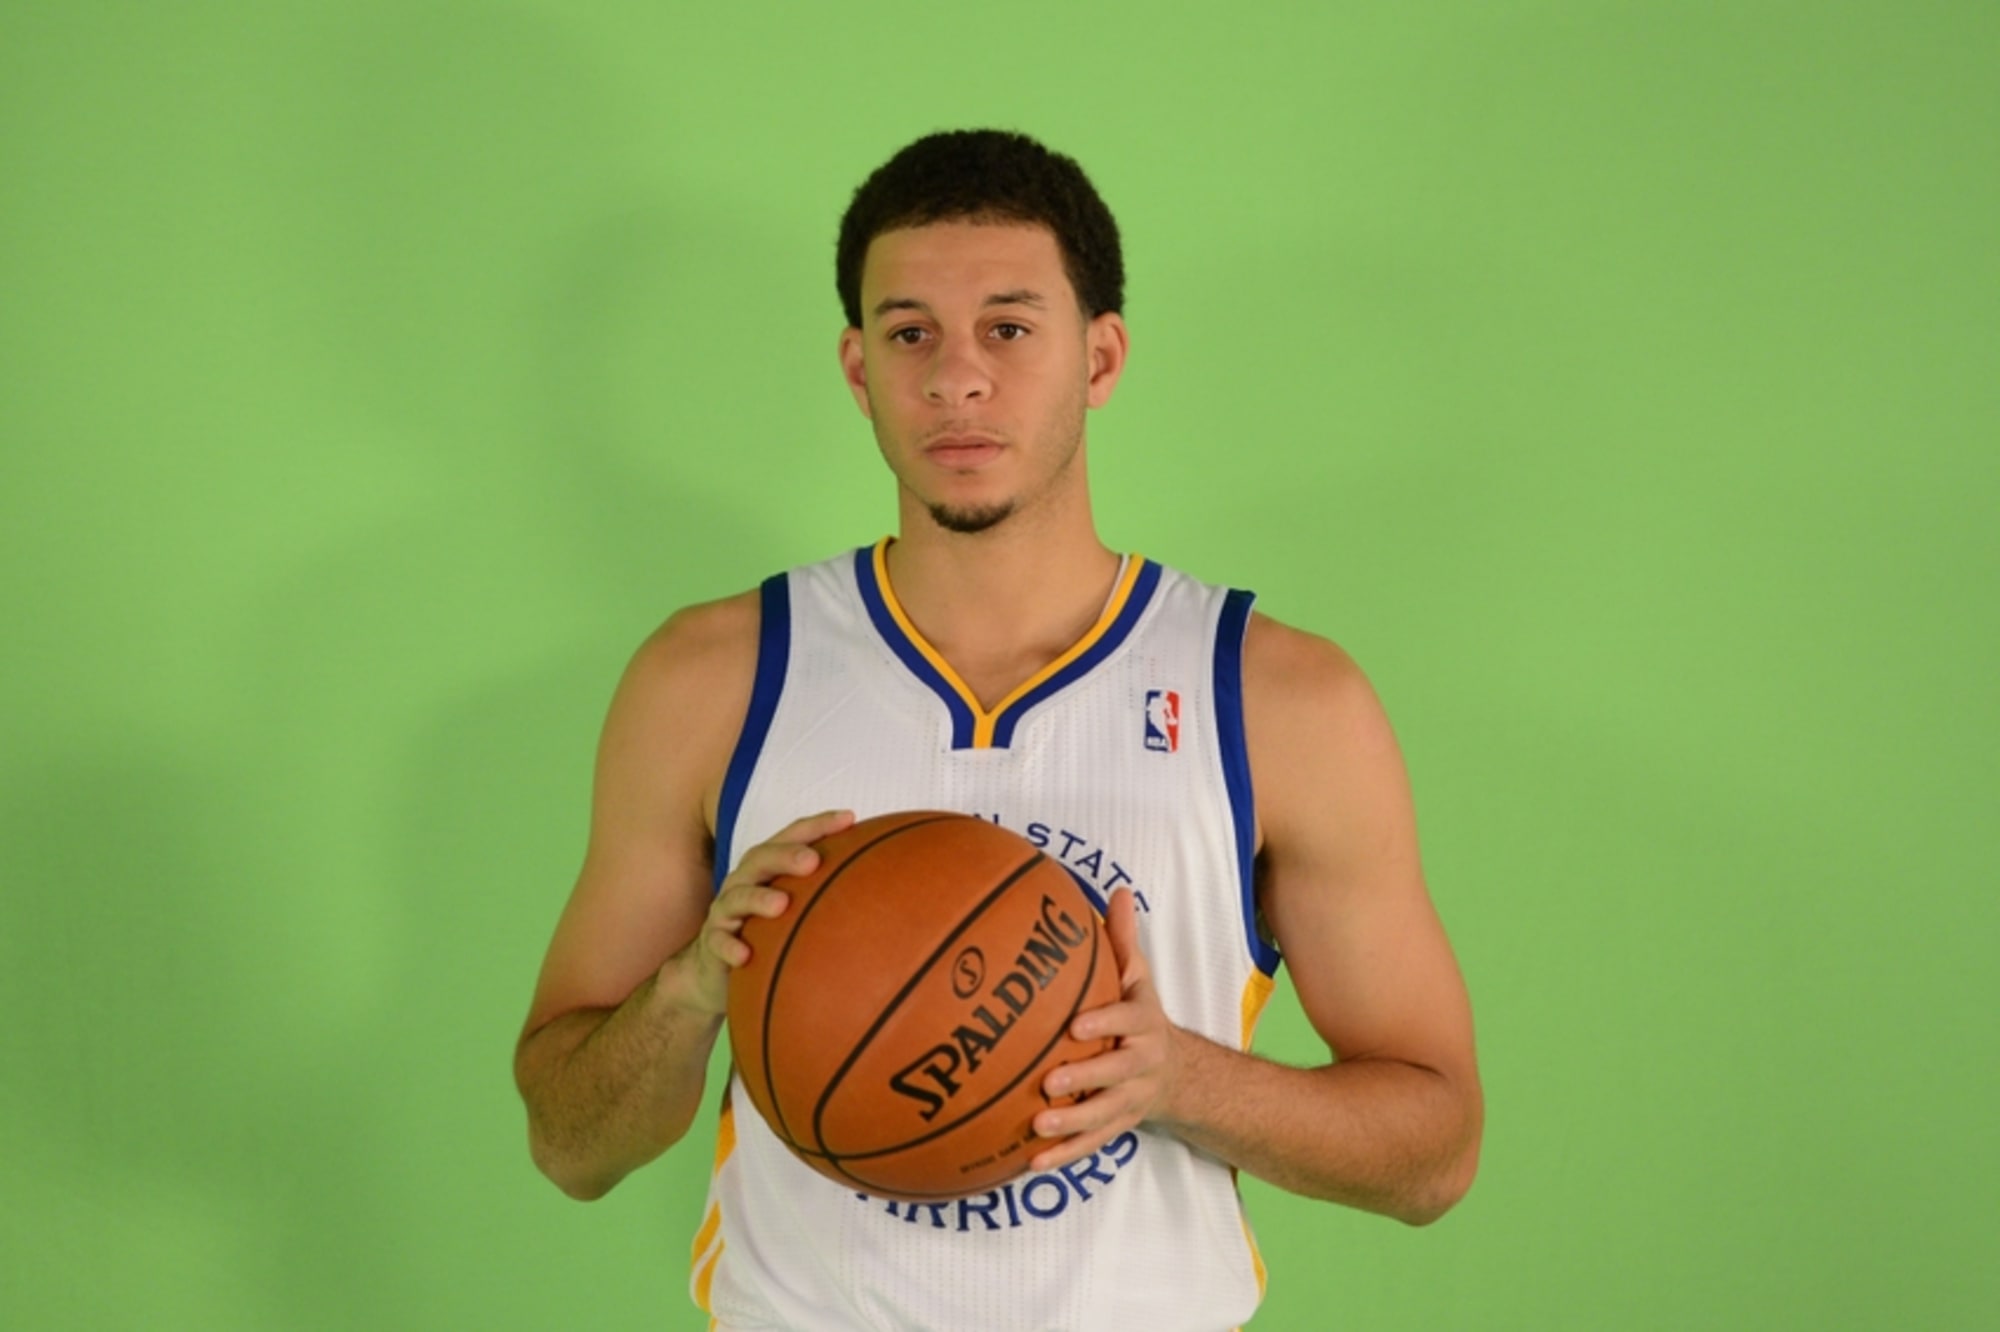 WATCH: Mavs guard Seth Curry showcases his 3-point skills in